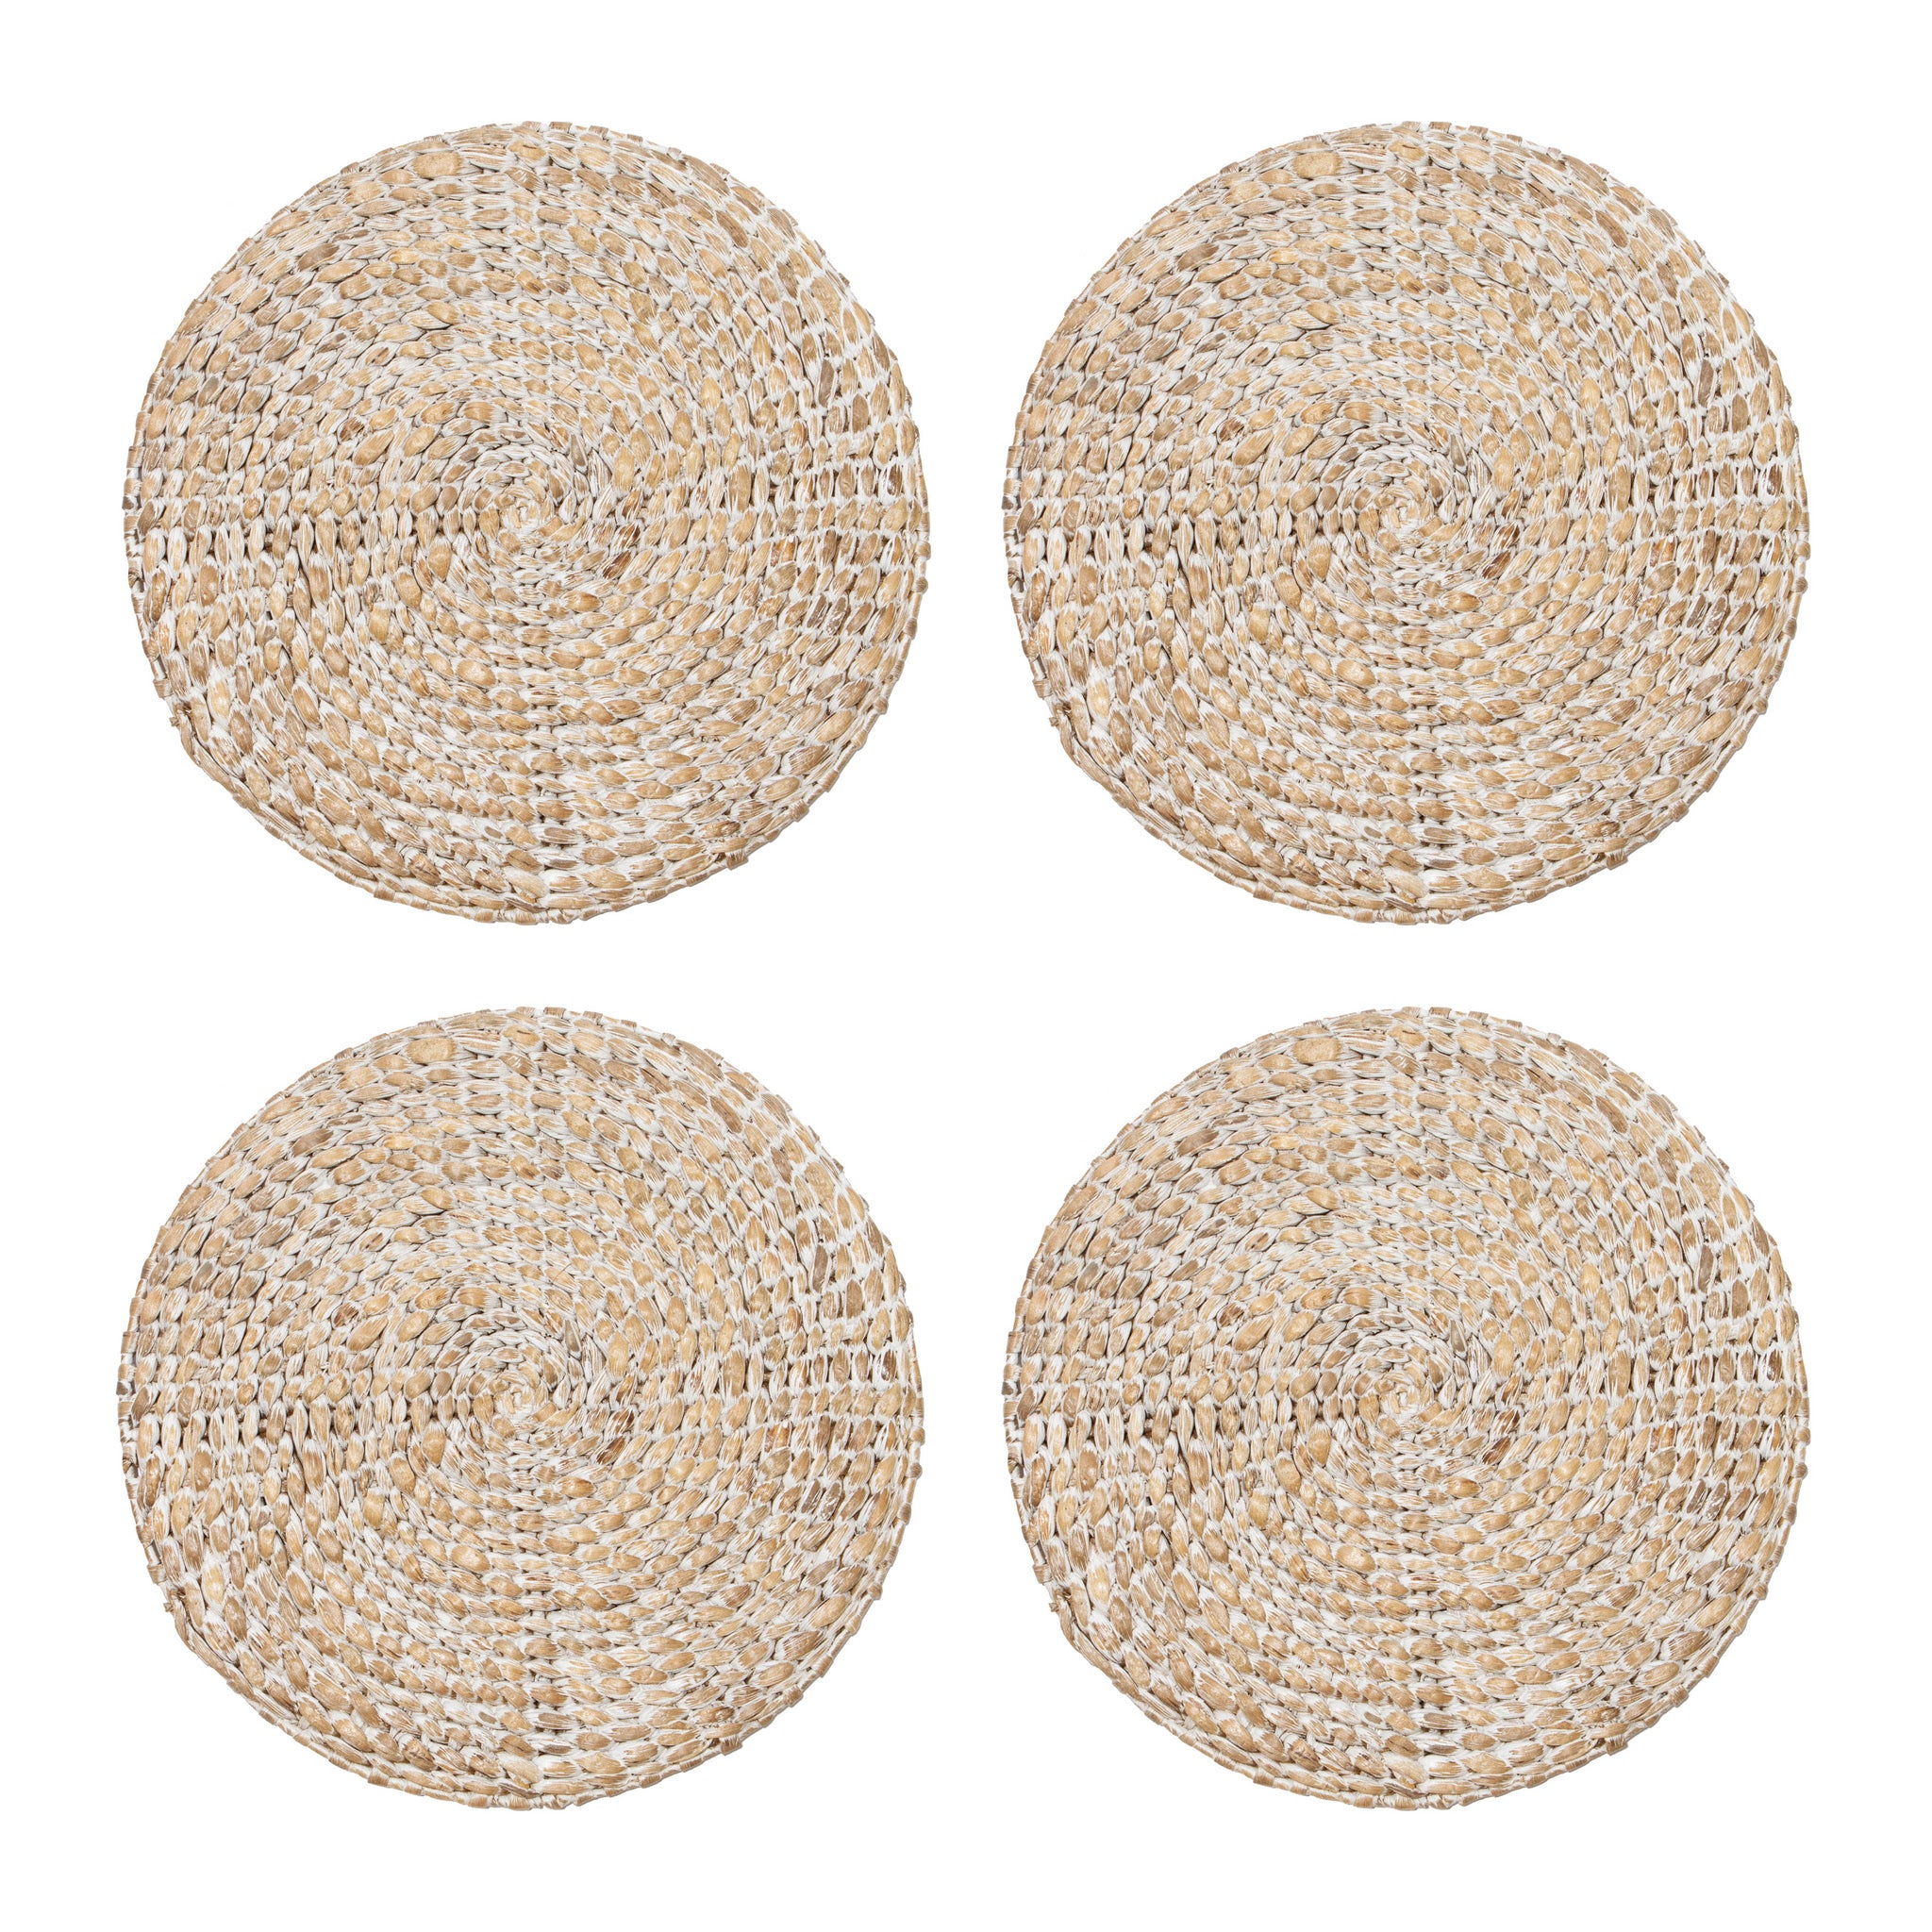 Everyday White Wash Round Placemat 38cm - Set of 4